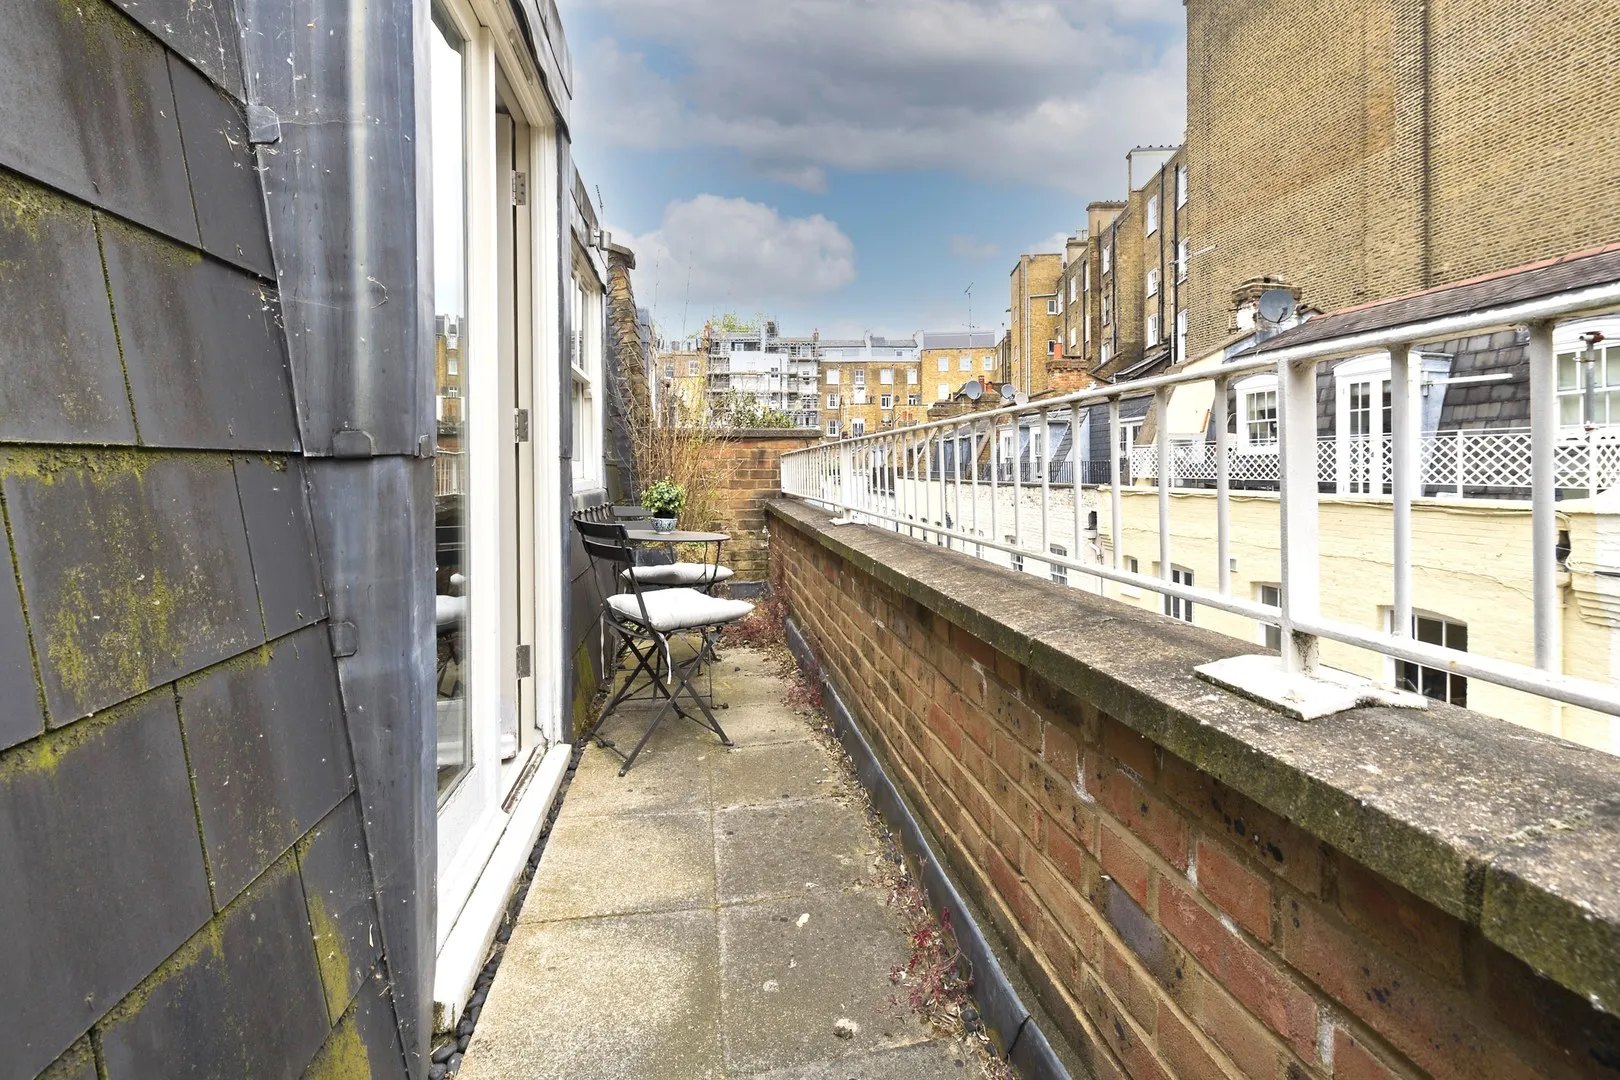 Manson Mews, holiday home in South Kensington, London